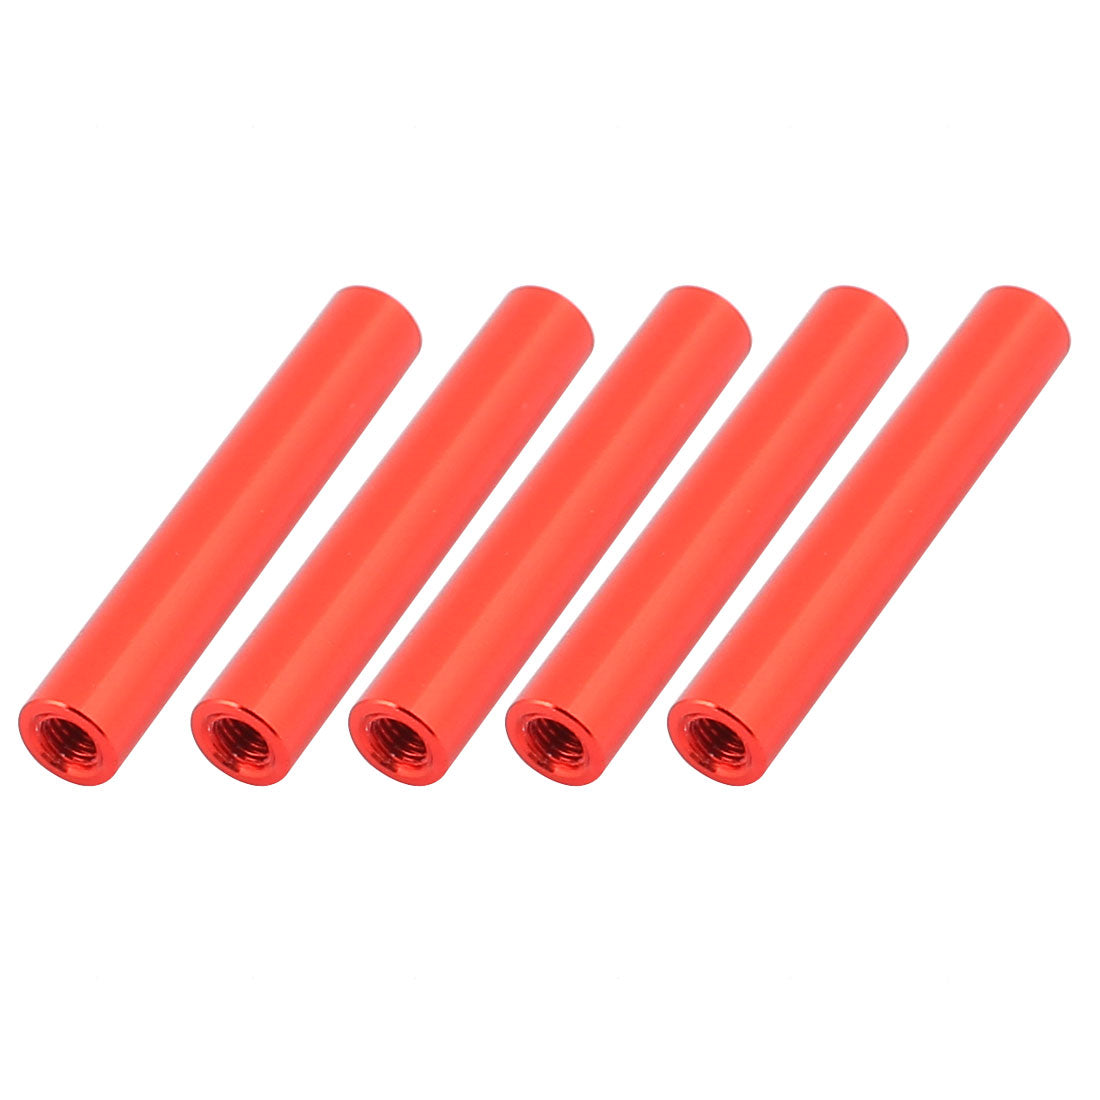 uxcell Uxcell 5 Pcs M3 x 30mm Round Aluminum Column Alloy Standoff Spacer Stud Fastener for Quadcopter Red